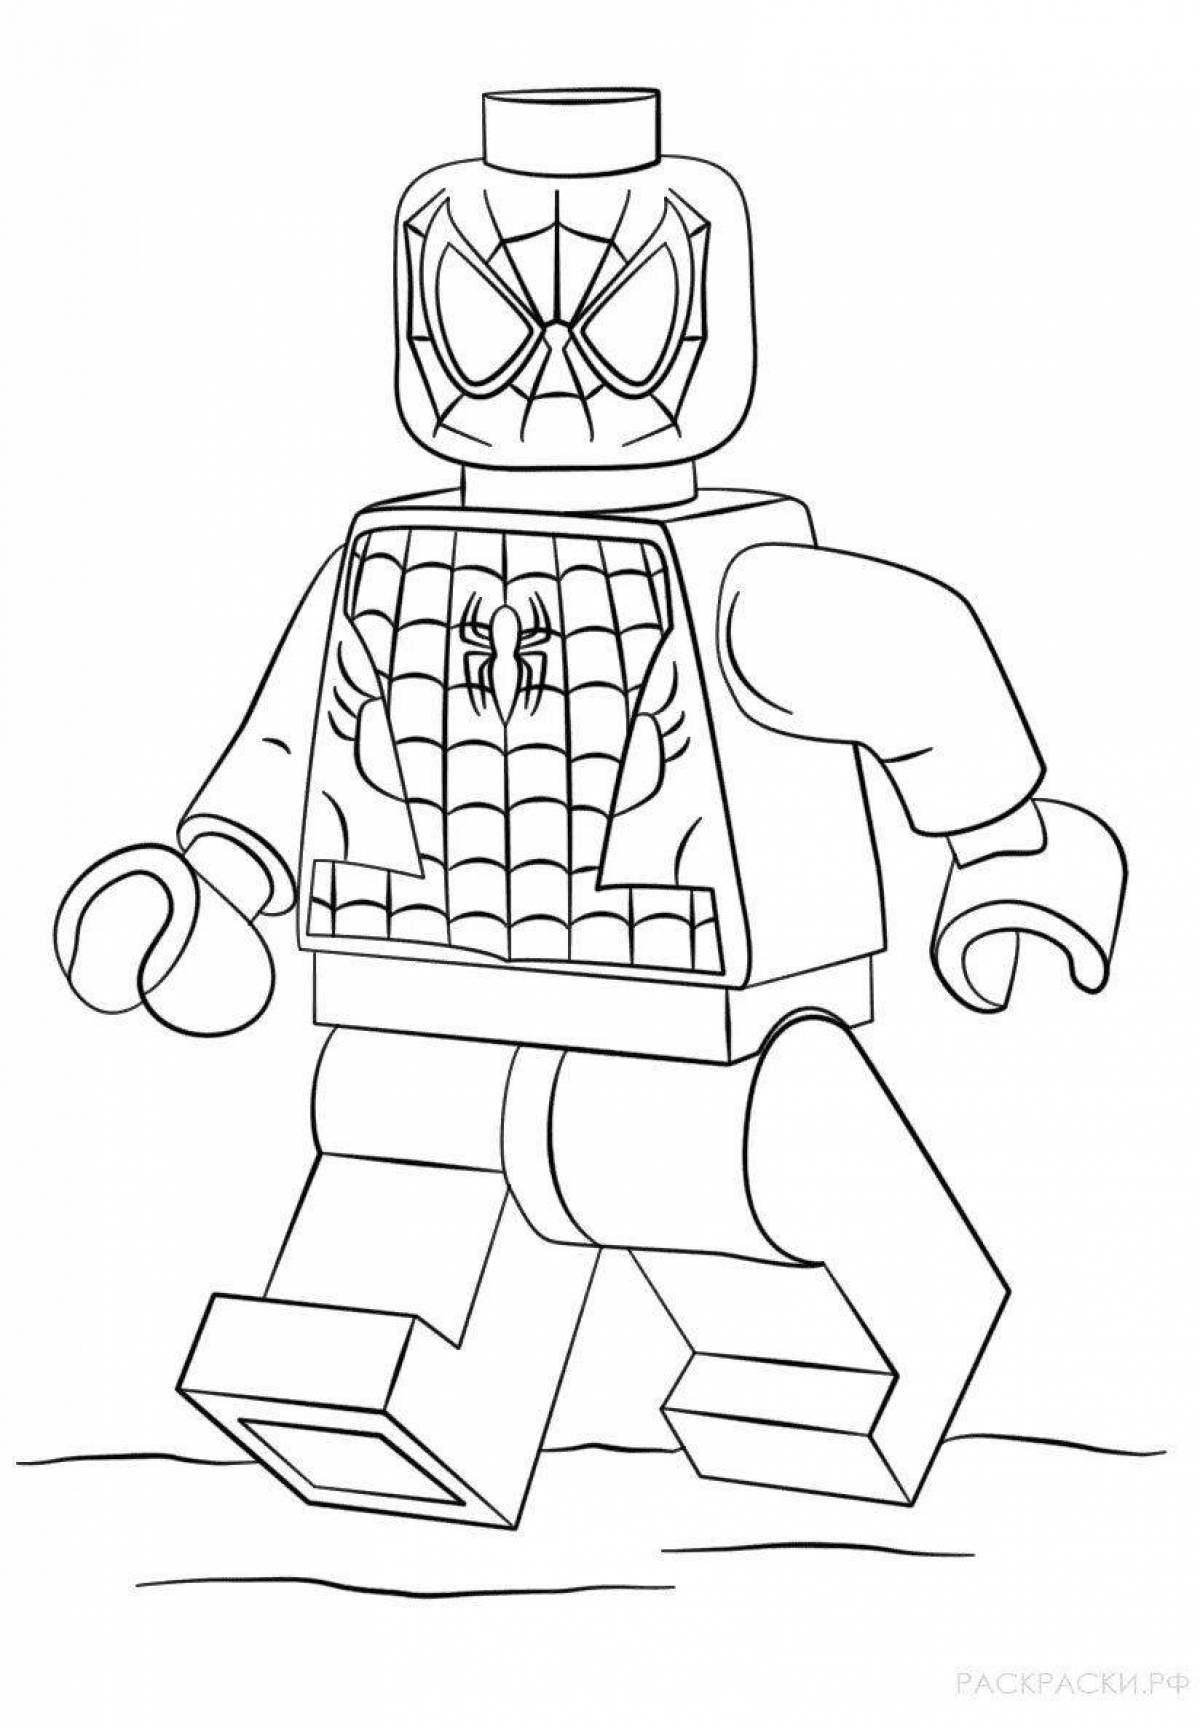 Colorful lego spiderman coloring page